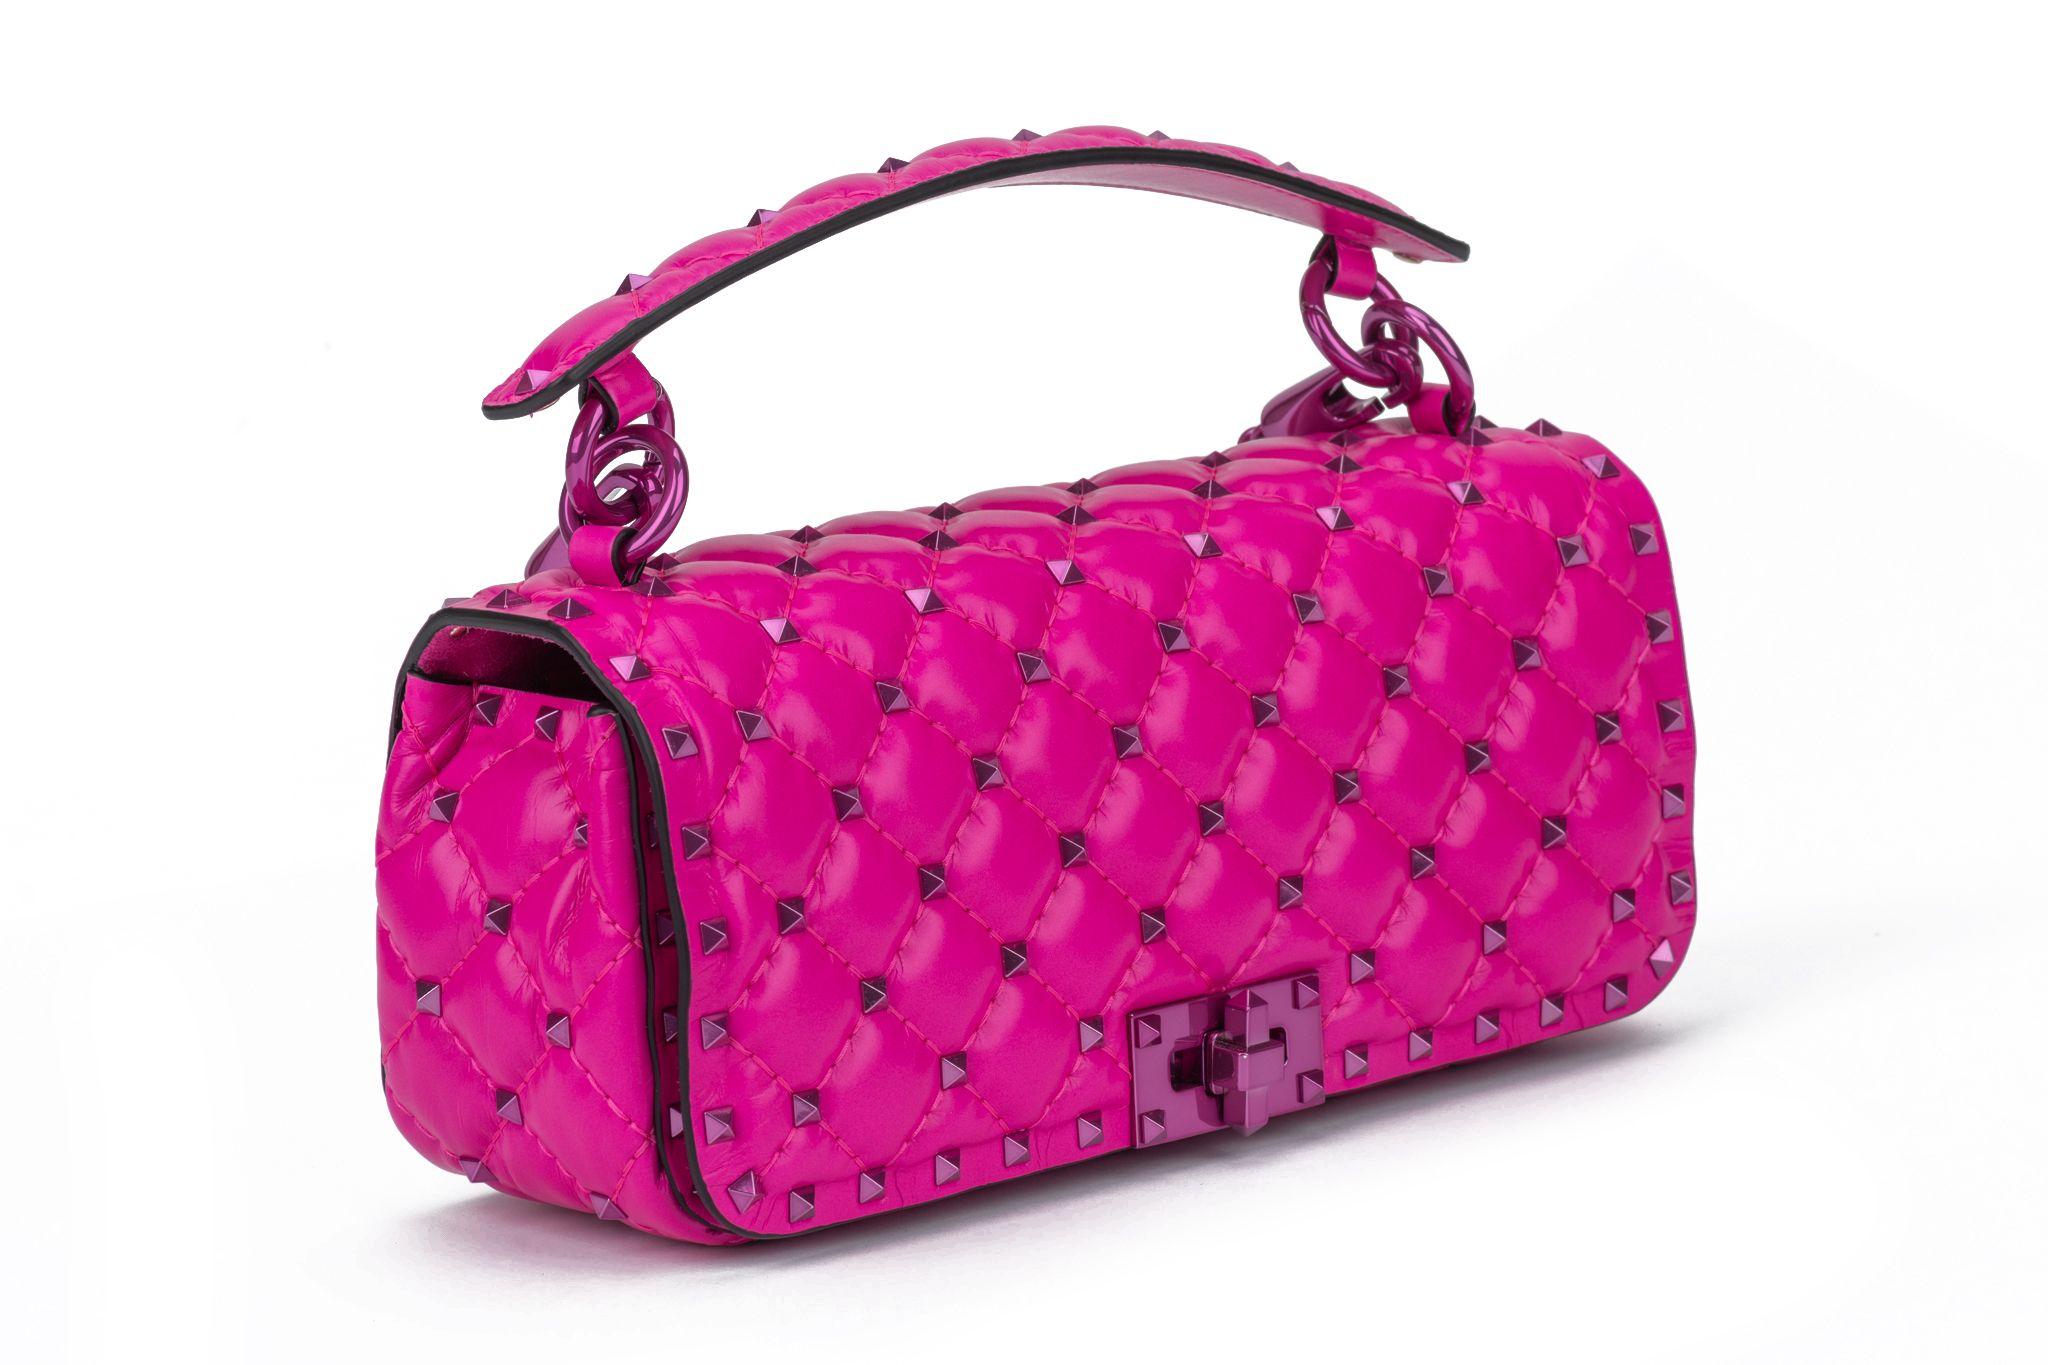 Valentino Garavani Rockstud Quilted Calfskin Convertible  hot Pink Shoulder Bag with pink studs and hardware.  Handle drop 3”, chain drop 11”, shoulder drop 21.5. The bag is new and comes with the original booklet and dustcover.